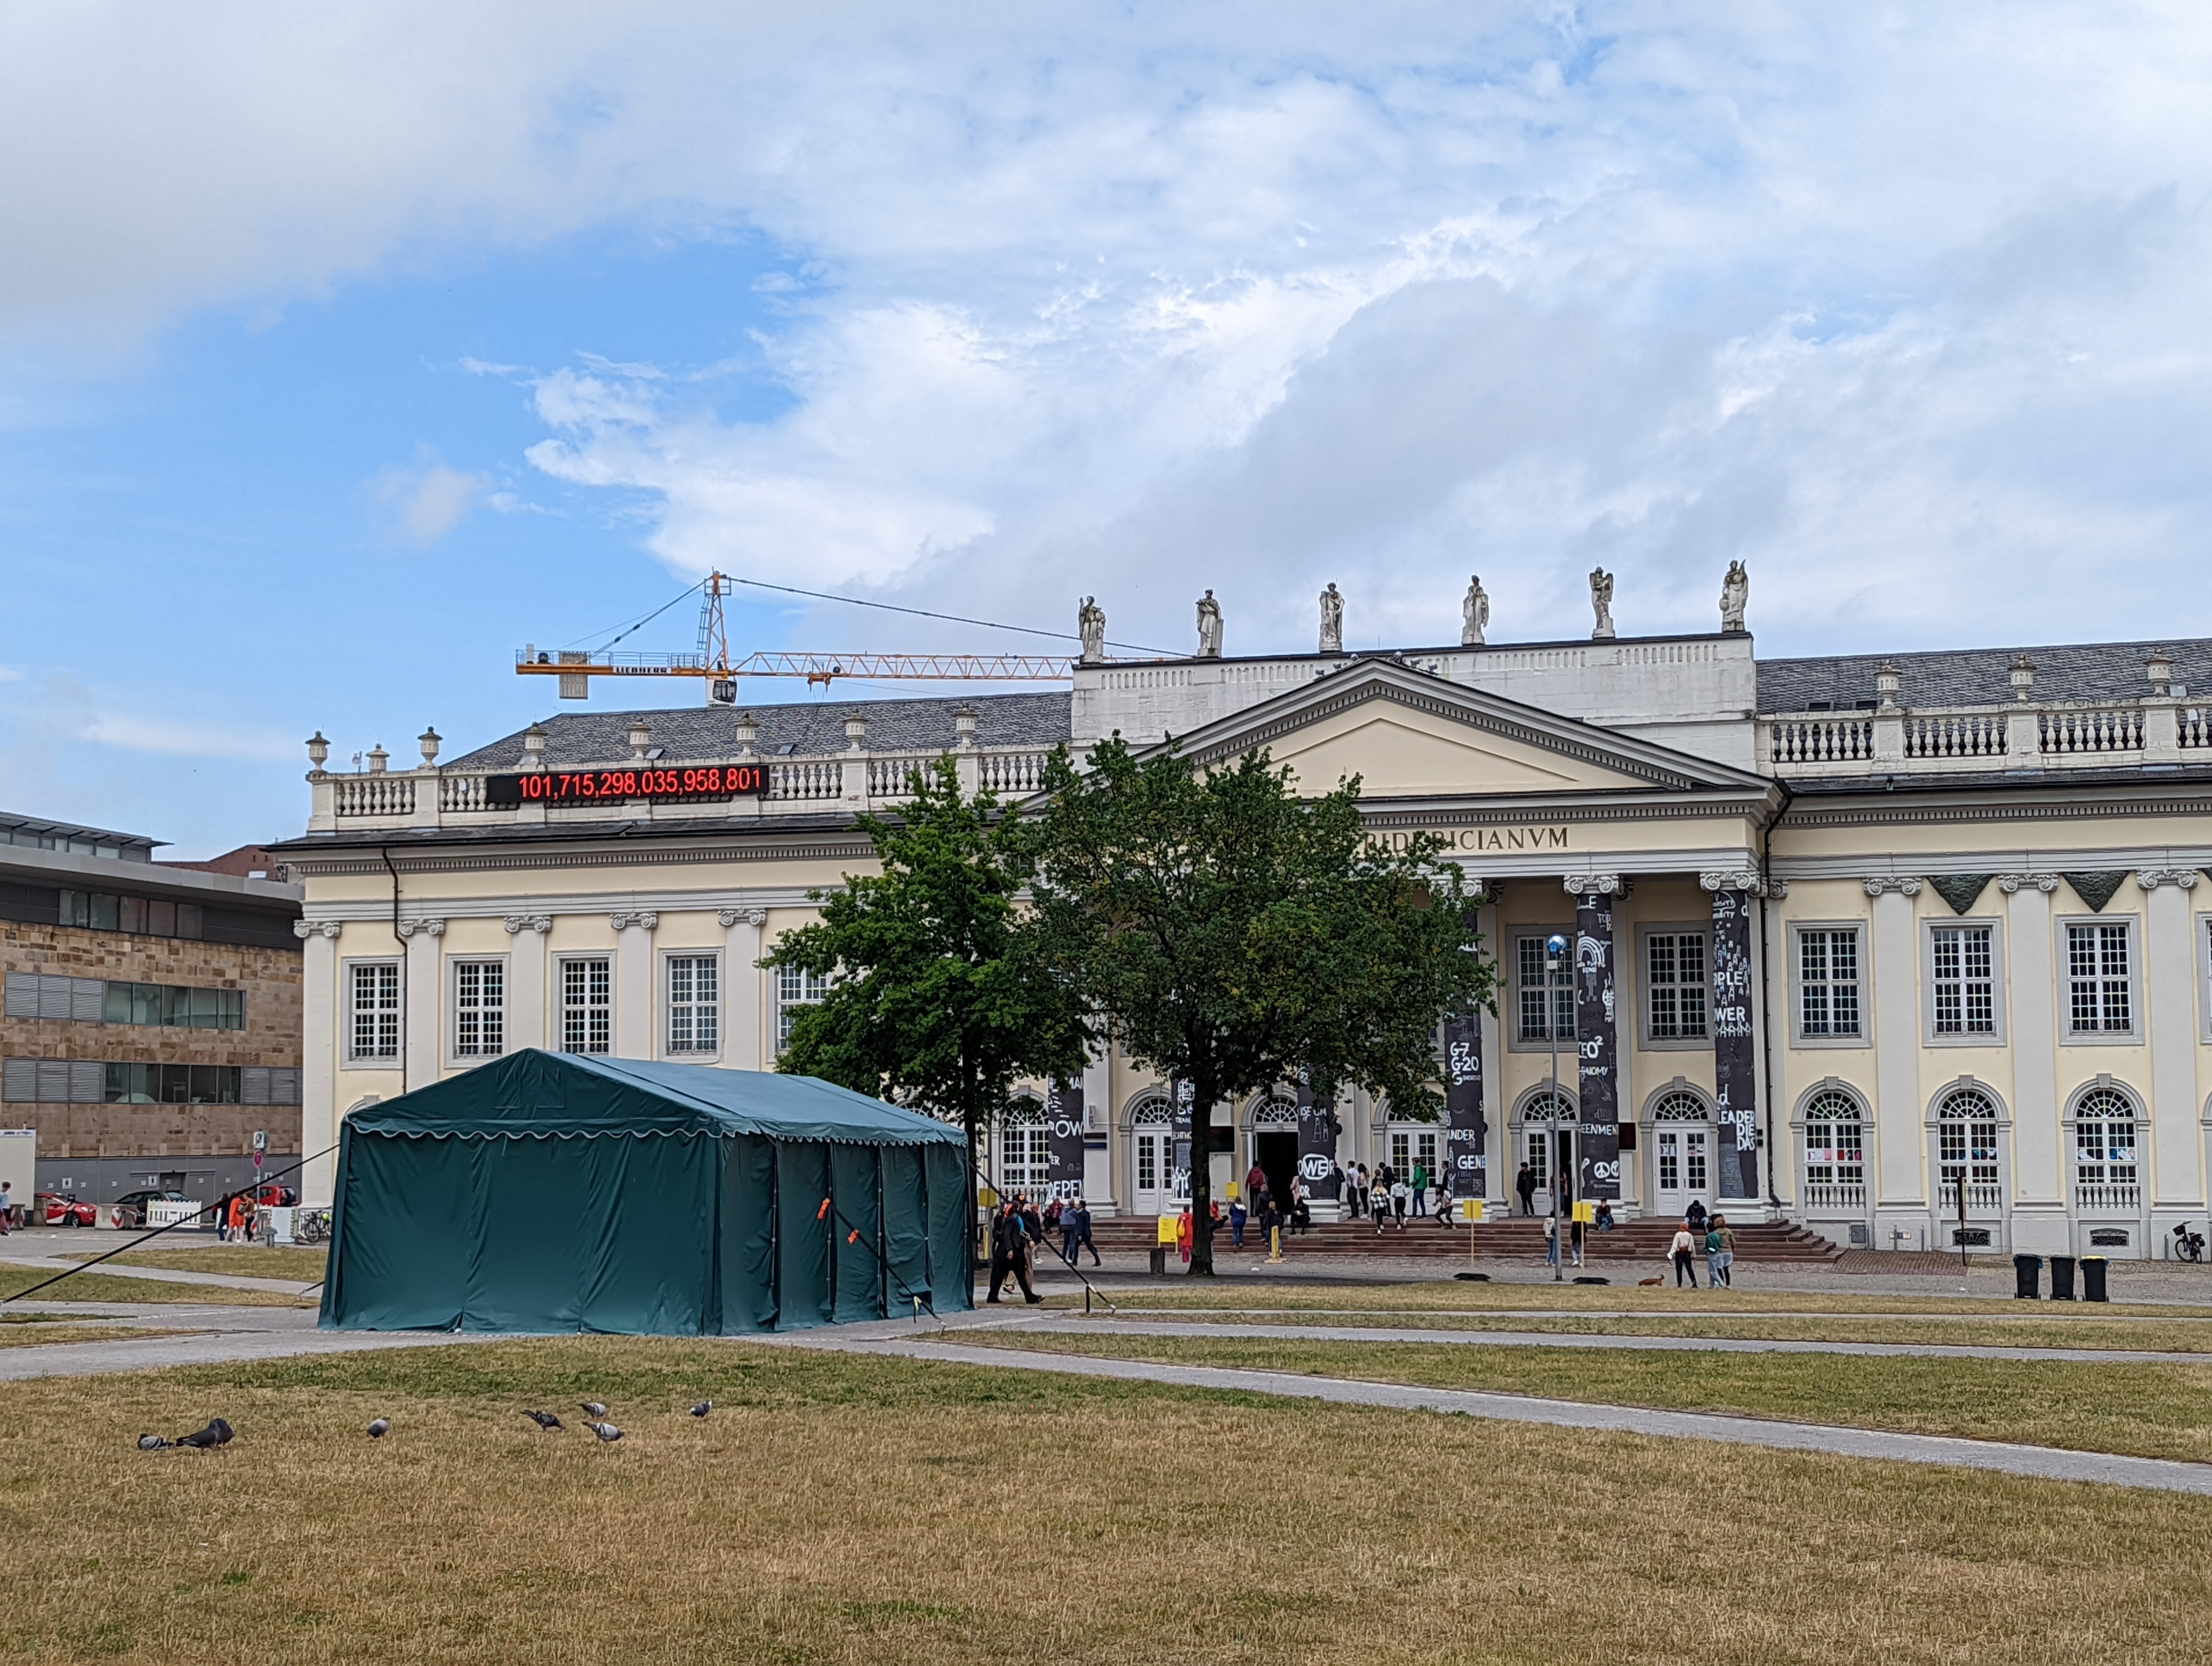 A rear view of a large green tent set in a grassy park in front of a large white German classicist style art gallery.